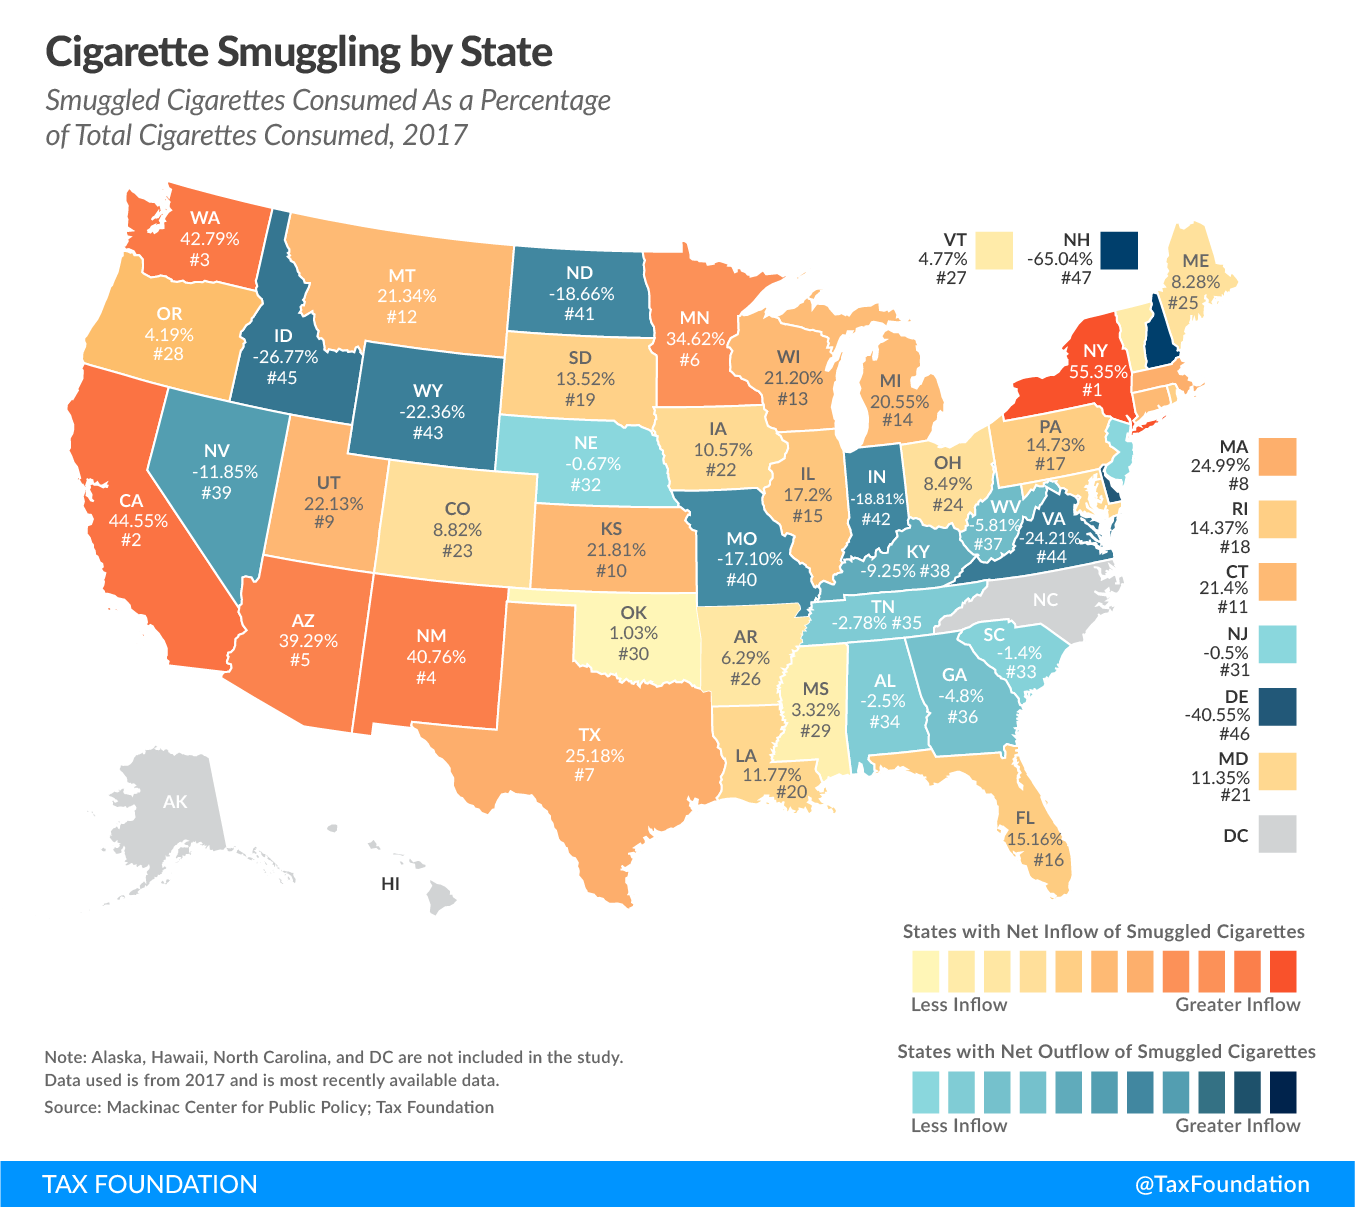 Cigarette smuggling by state